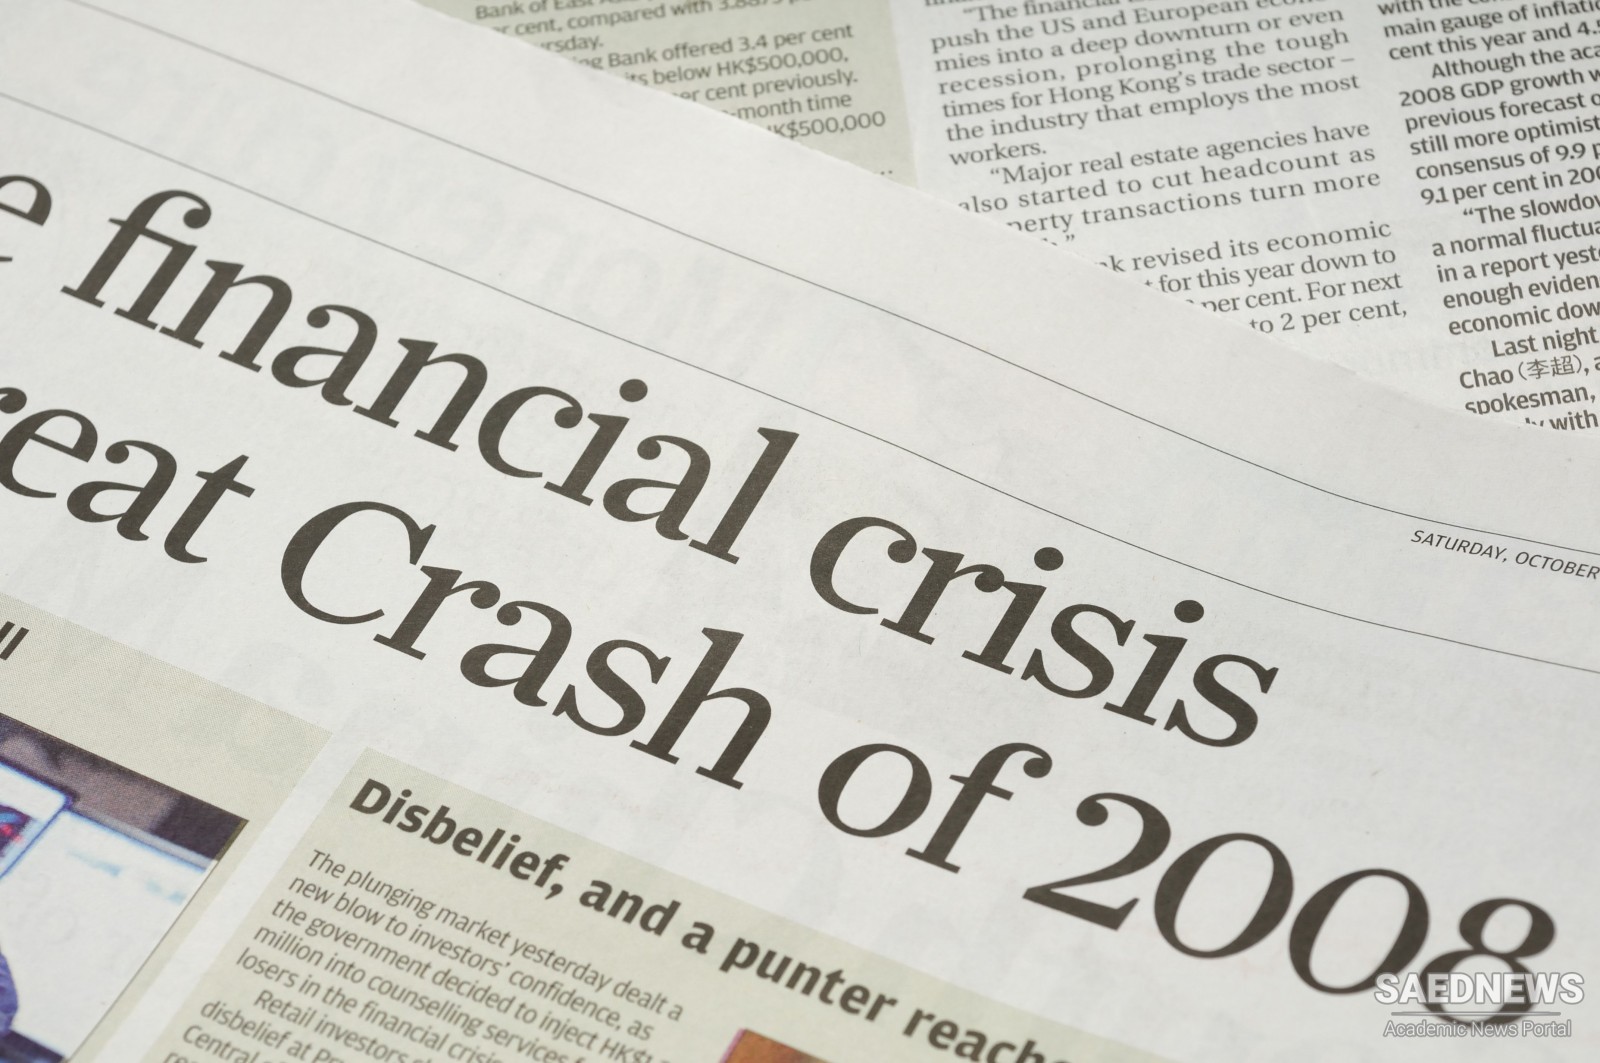 Great Recession and Collapse of the Global Financial Financial System